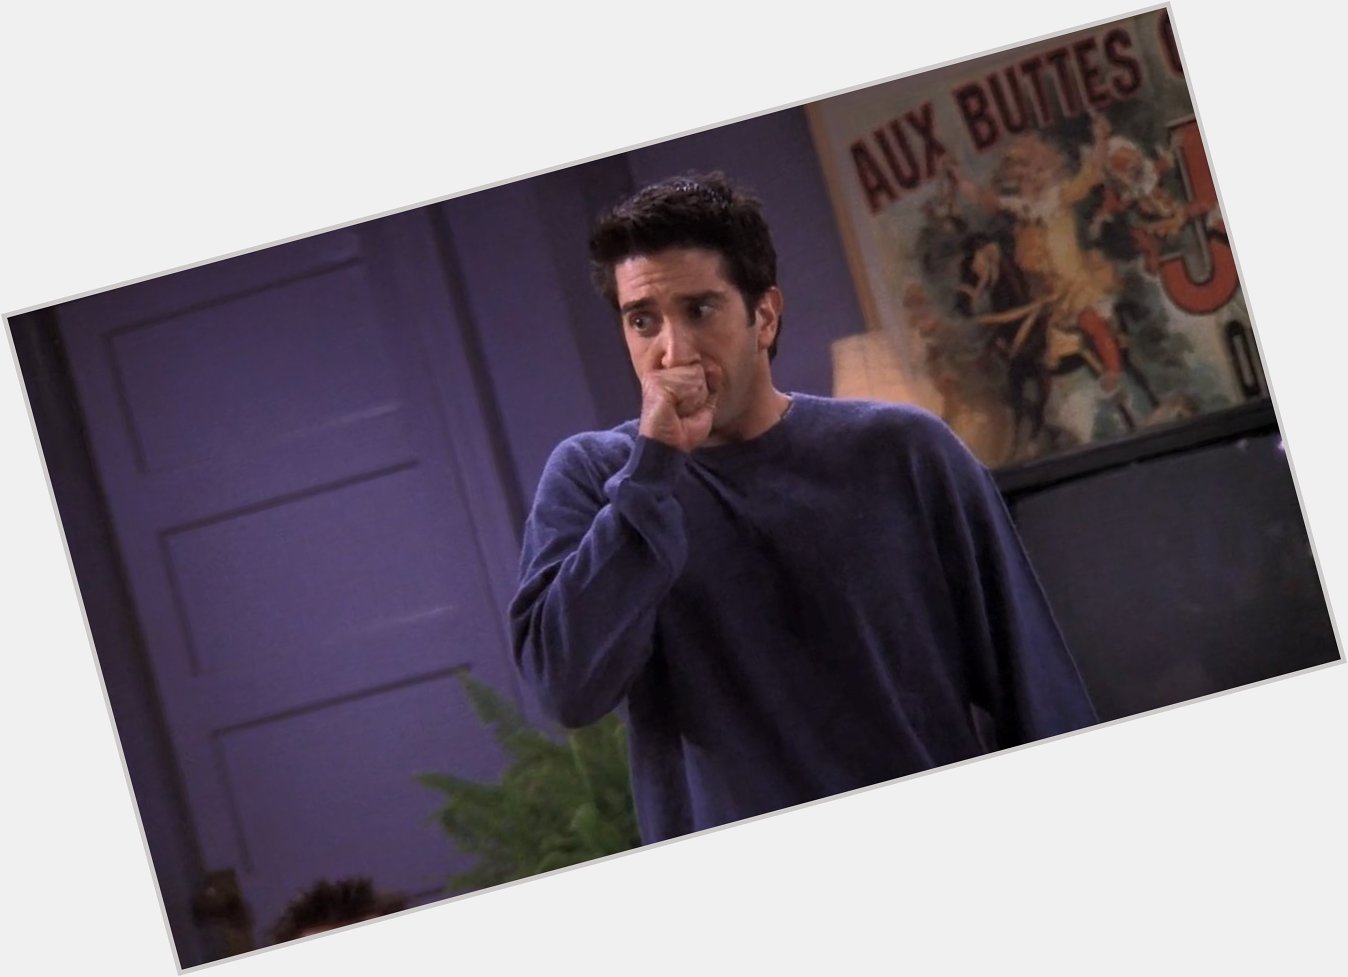 Happy birthday david schwimmer! thank you so much for playing the iconic role of ross geller we love you so much 